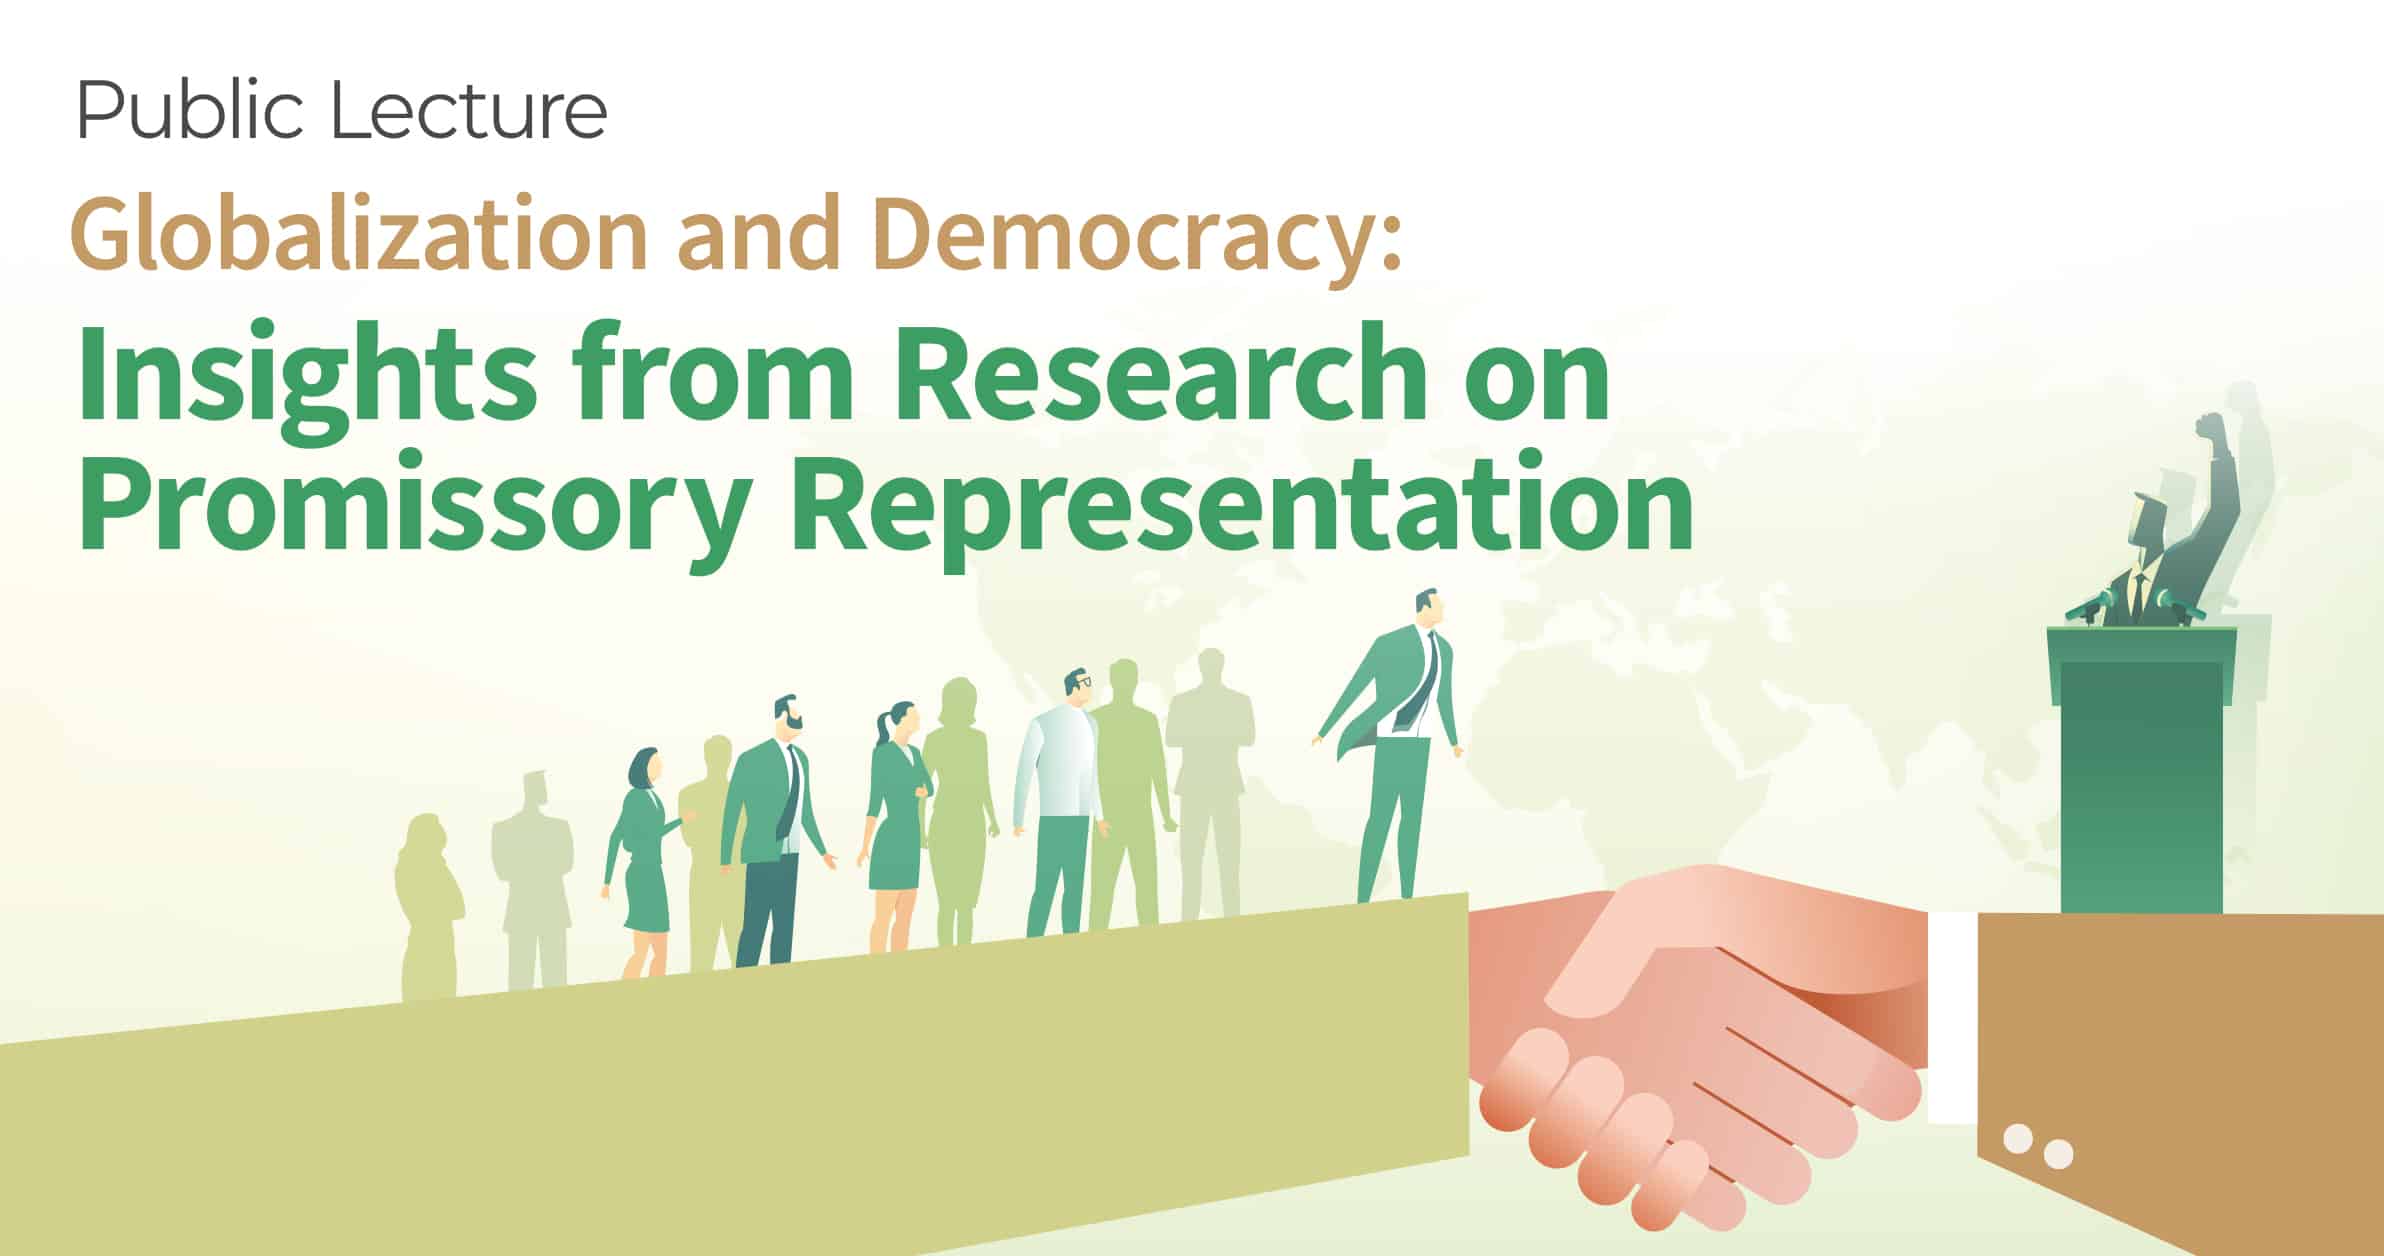 Public Lecture: Globalization and Democracy: Insights from Research on Promissory Representation